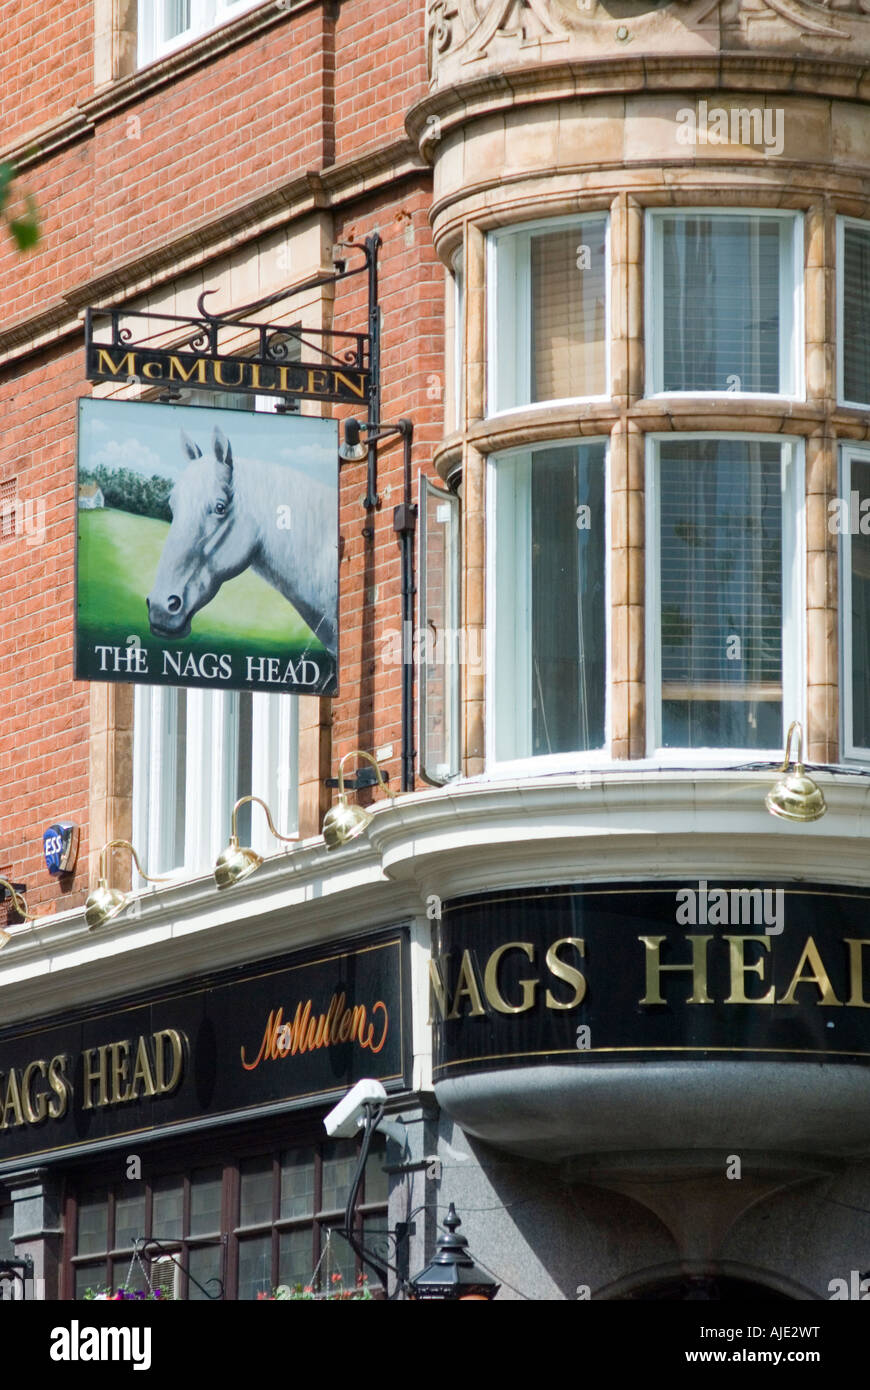 sign of Nags Head pub in Floral Street Covent Garden Stock Photo